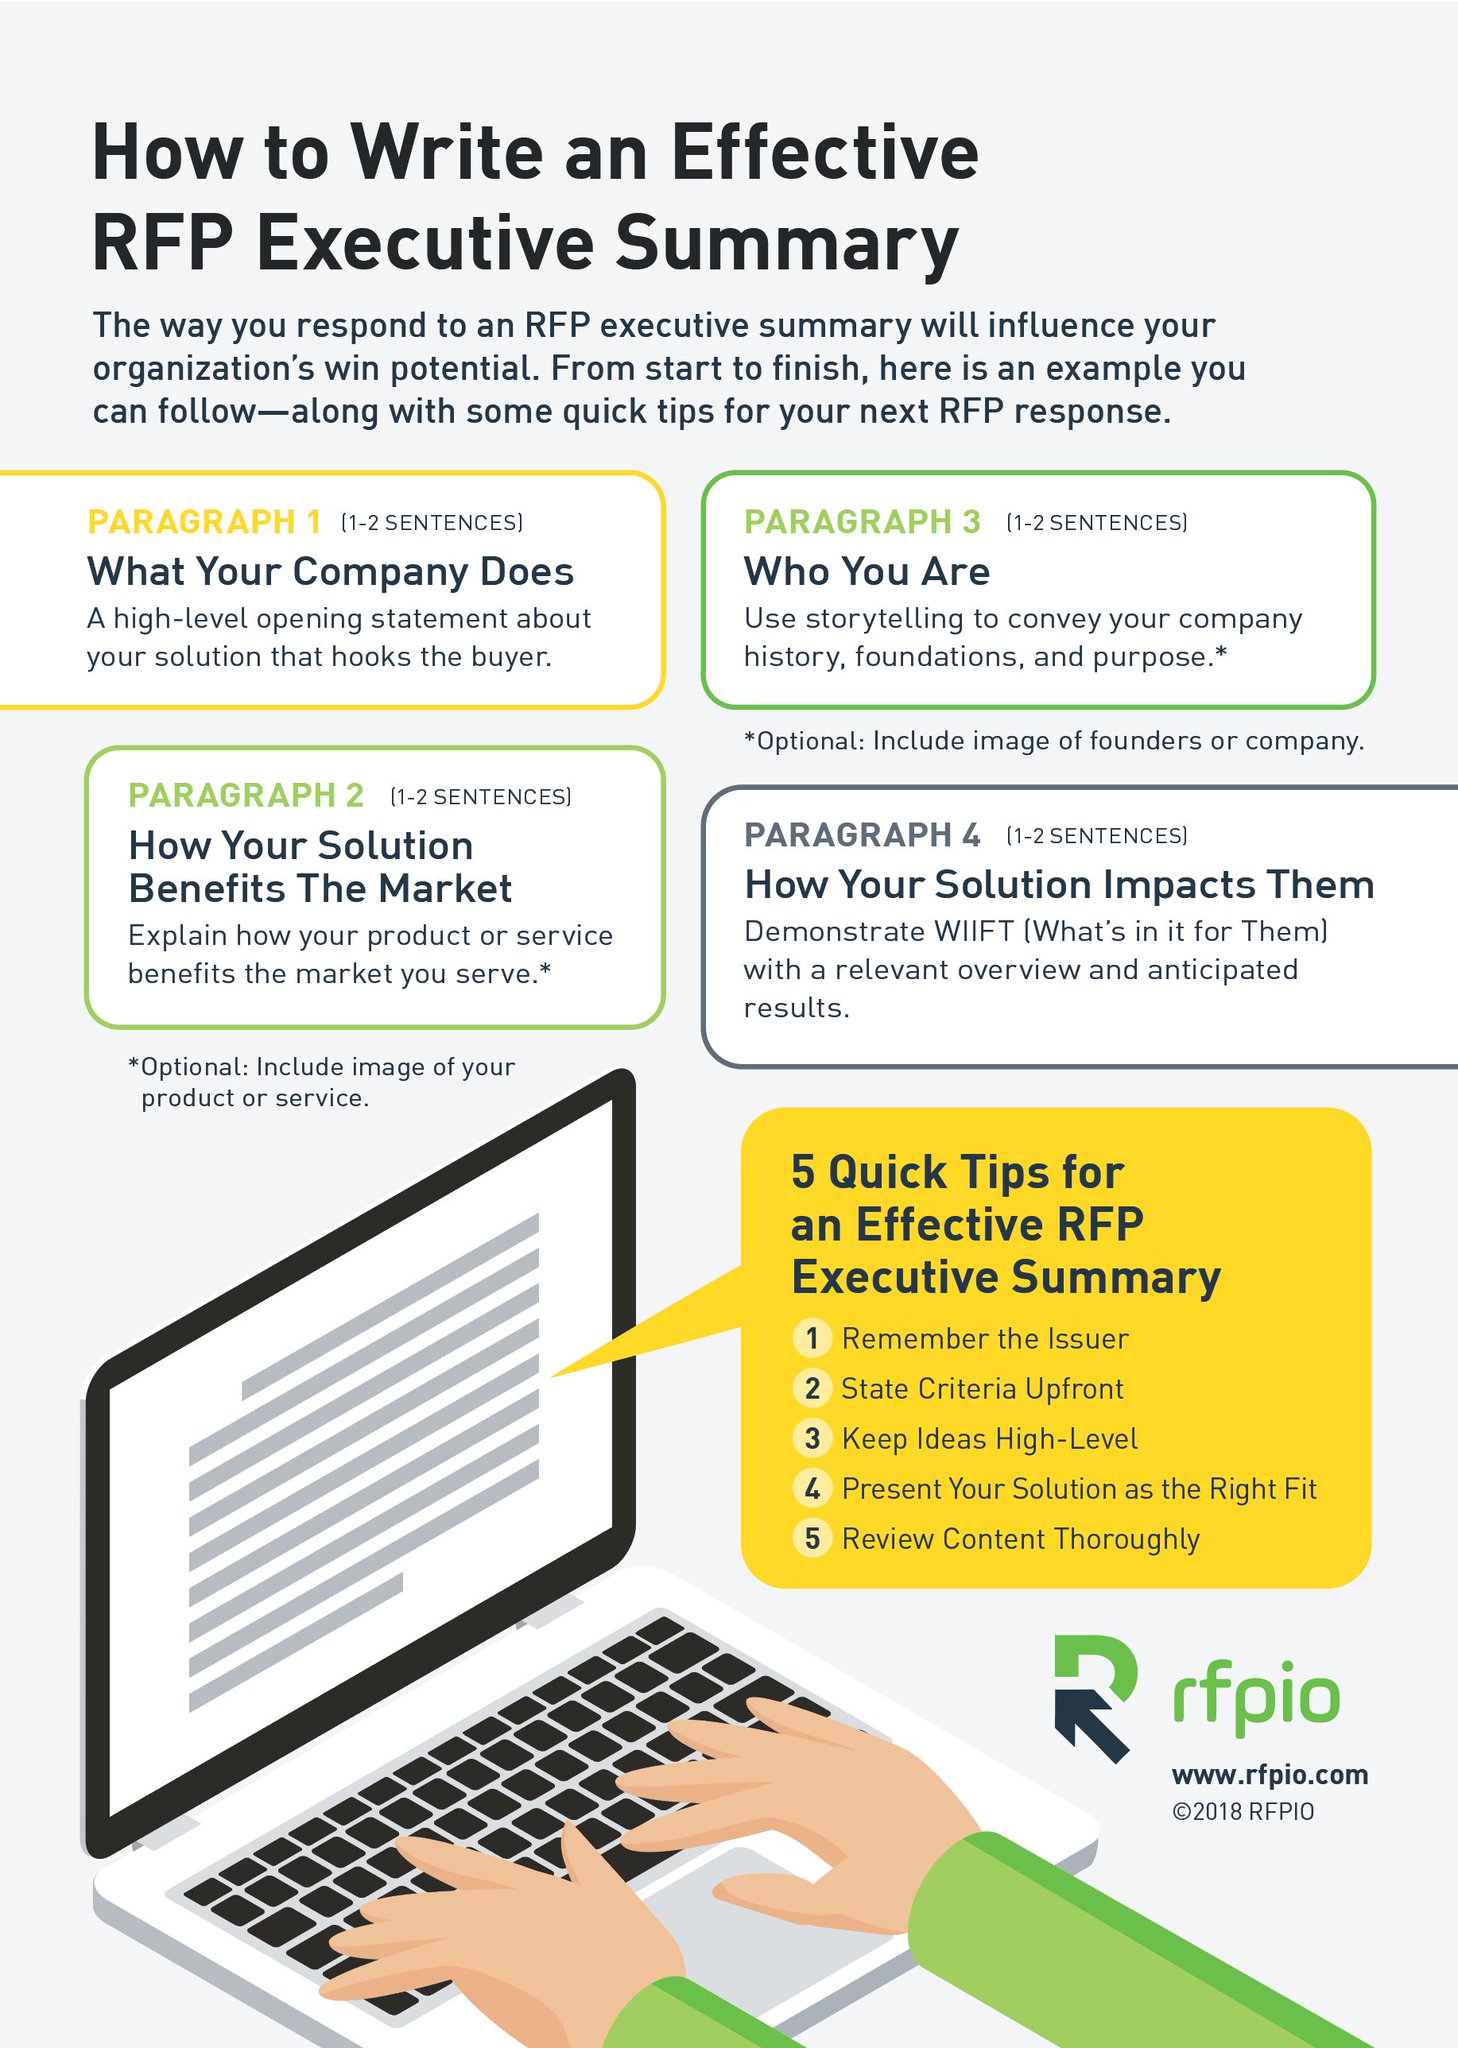 RFPIO on Twitter: "Ready to #winbusiness this week? Use our cheat